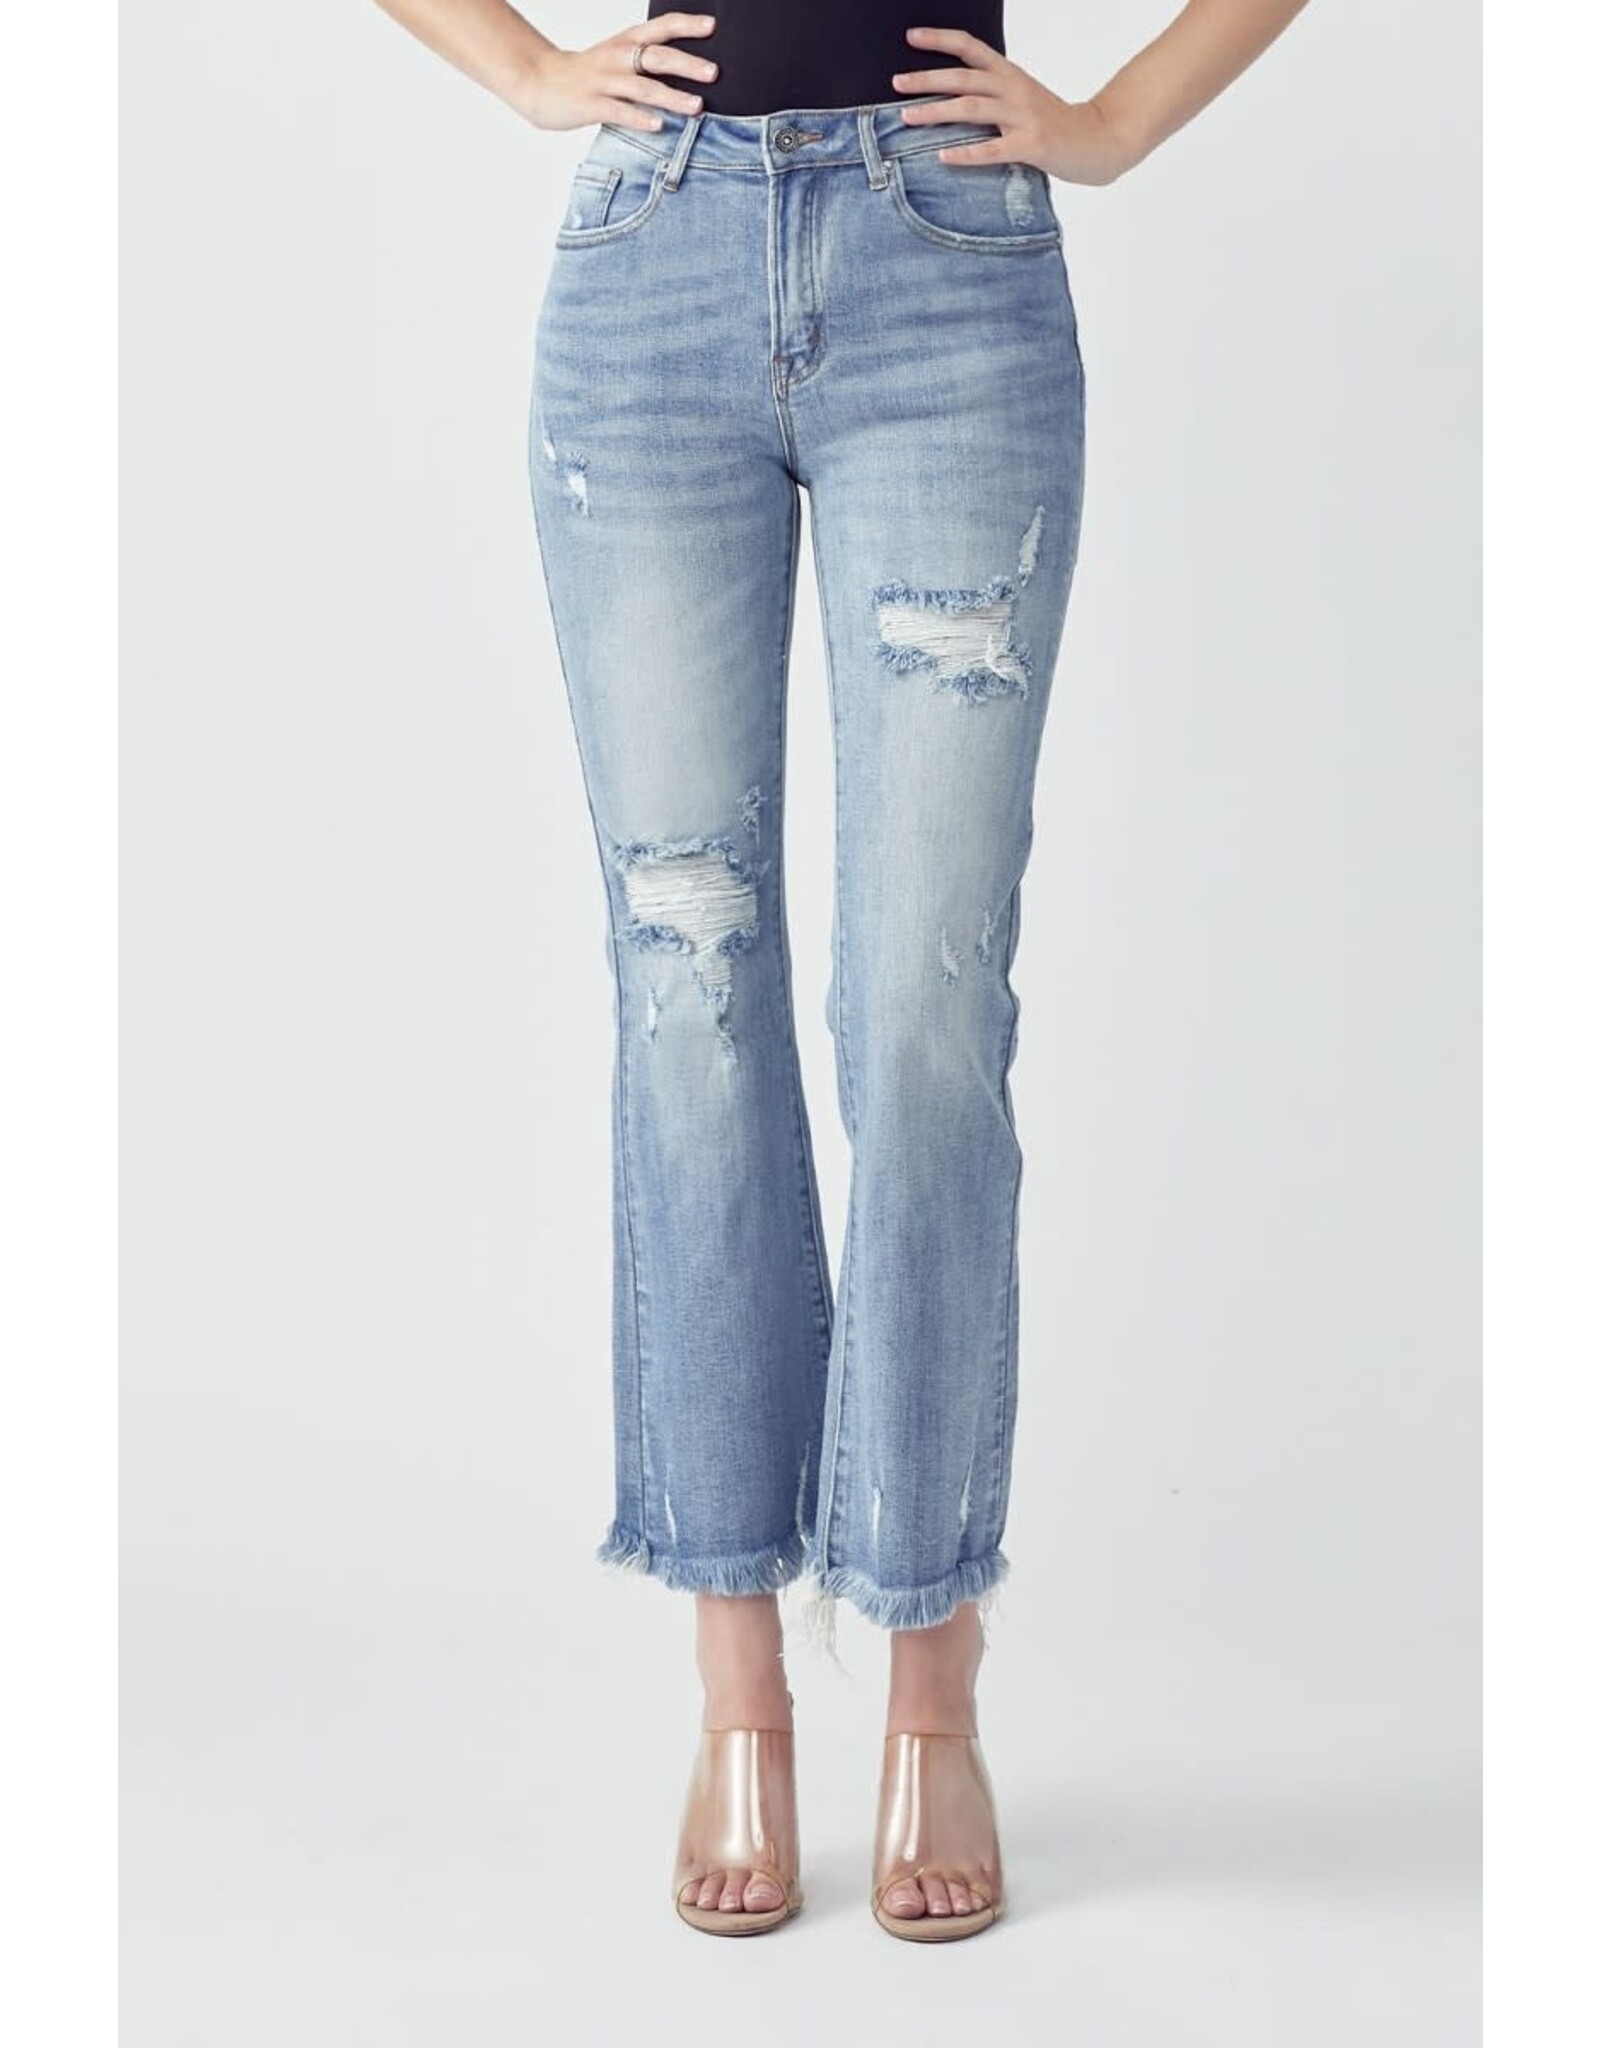 Risen Risen MID RISE DISTRESSED Ankle Flare Jeans